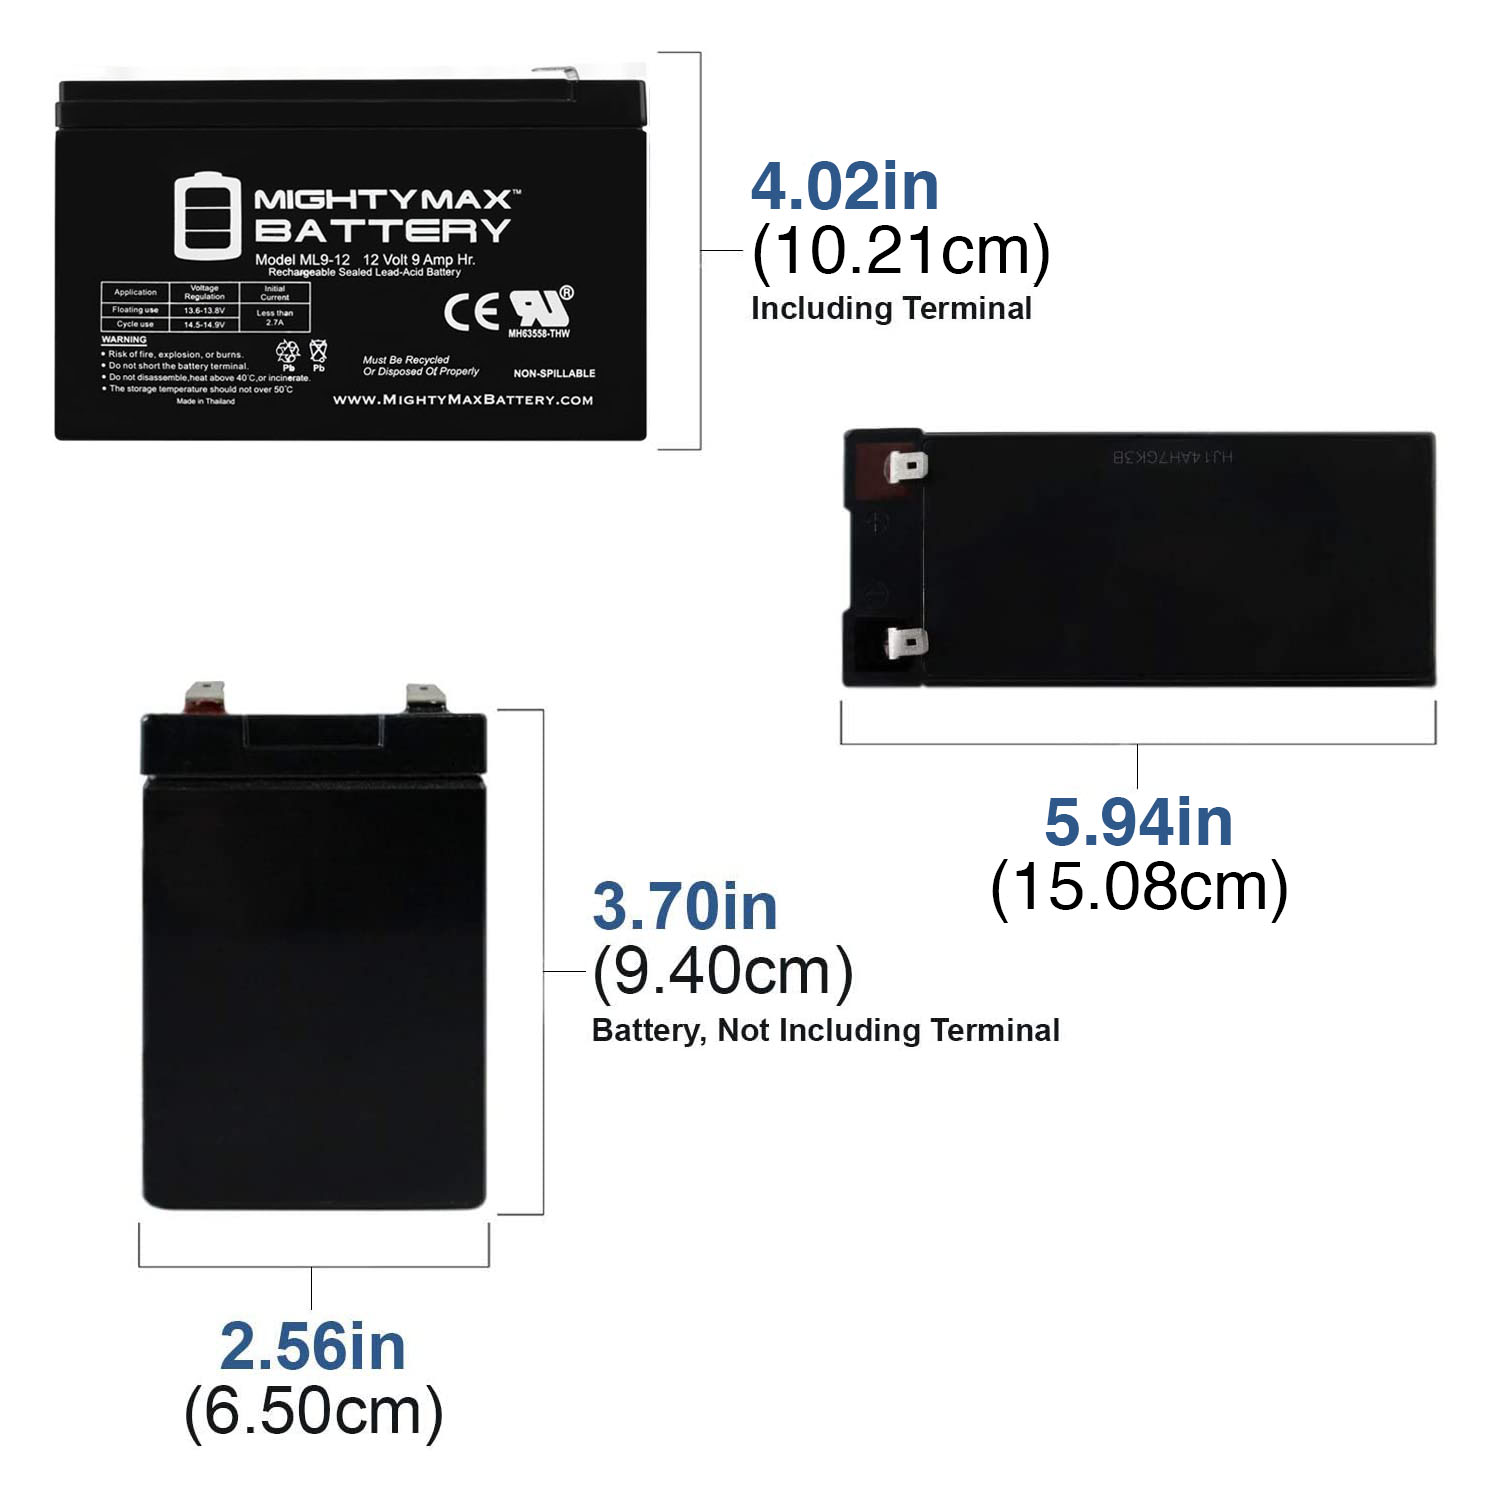 Sigma Batería Battery Pack para Buster 2000 HL - bike-components